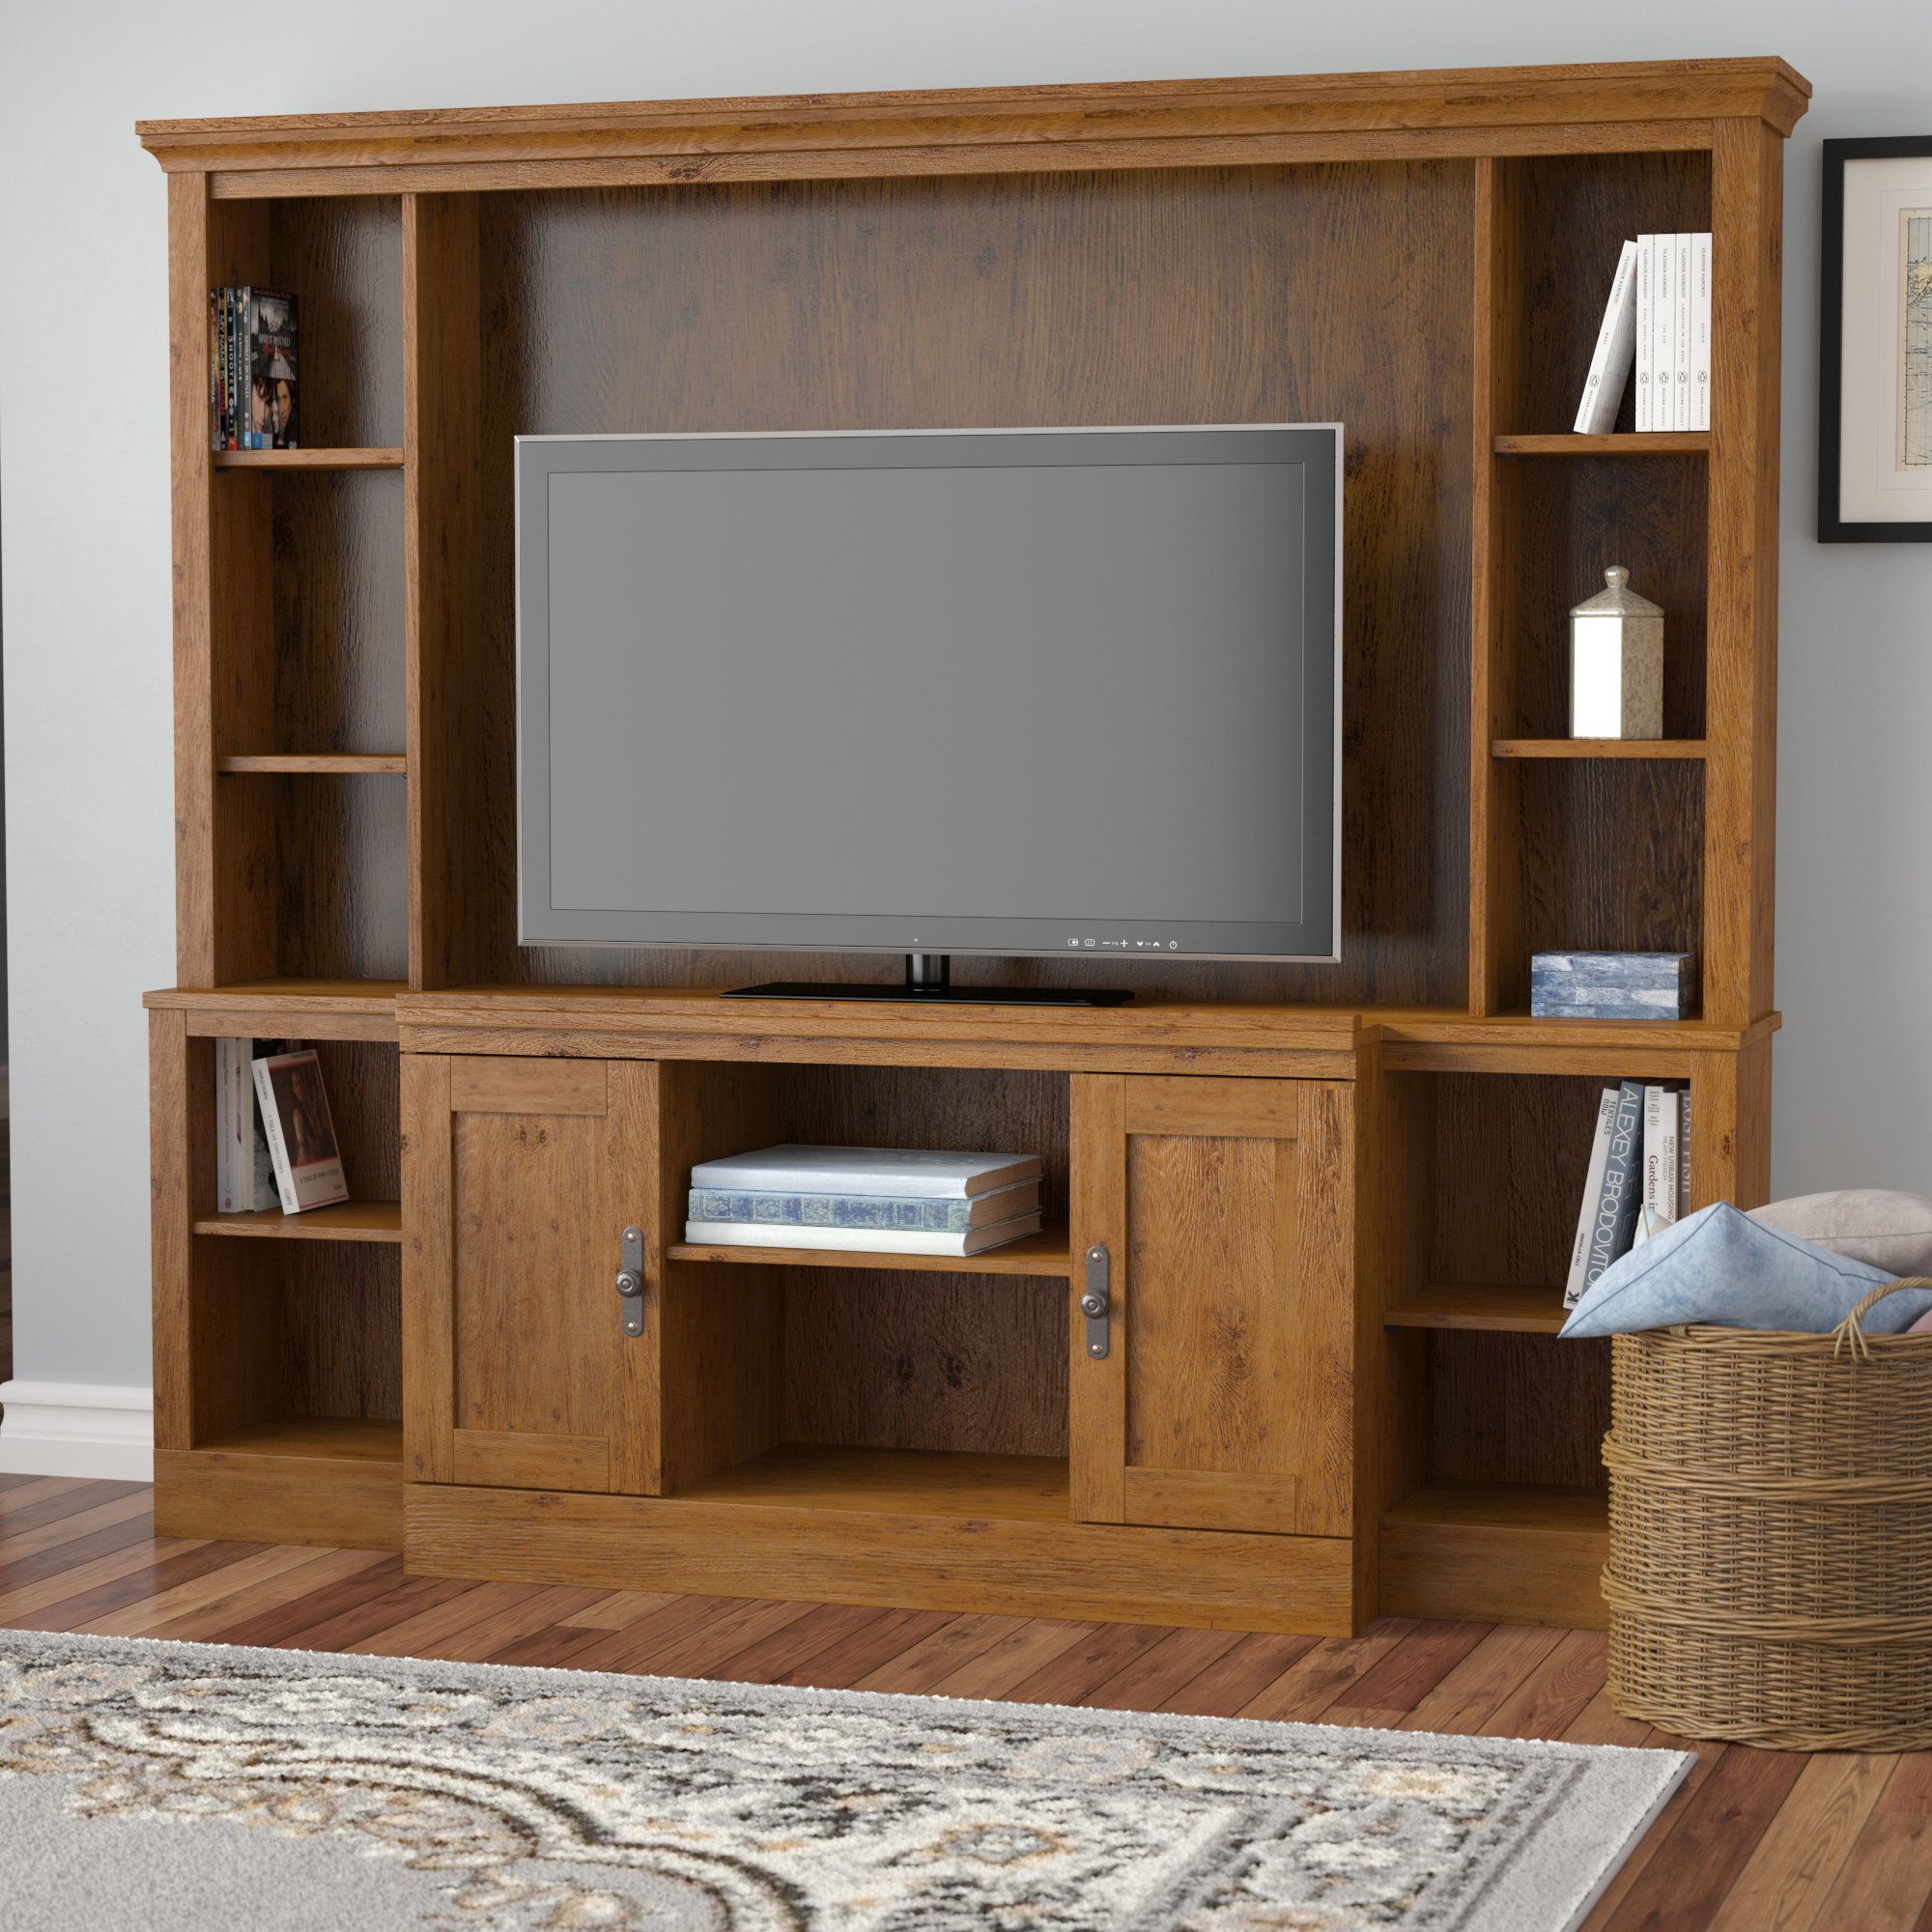 Tv Stands With Hutch You'll Love | Wayfair Pertaining To Kilian Grey 49 Inch Tv Stands (View 3 of 30)